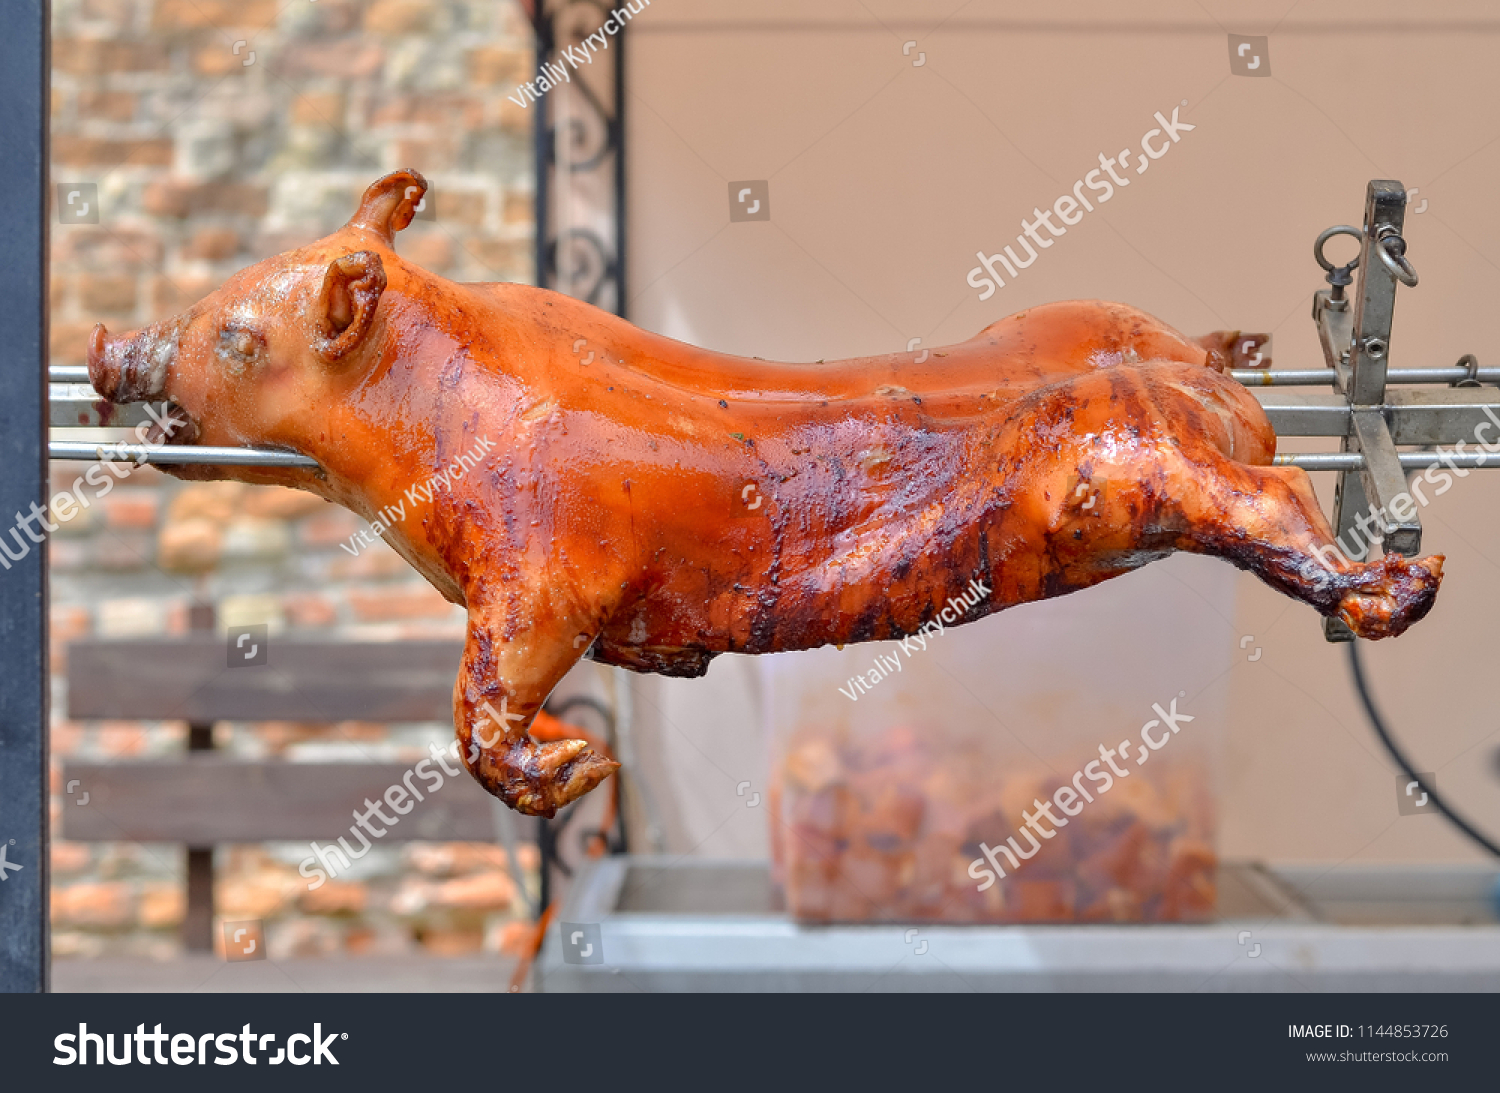 stock-photo-roasted-pig-cooked-on-fire-1144853726.jpg